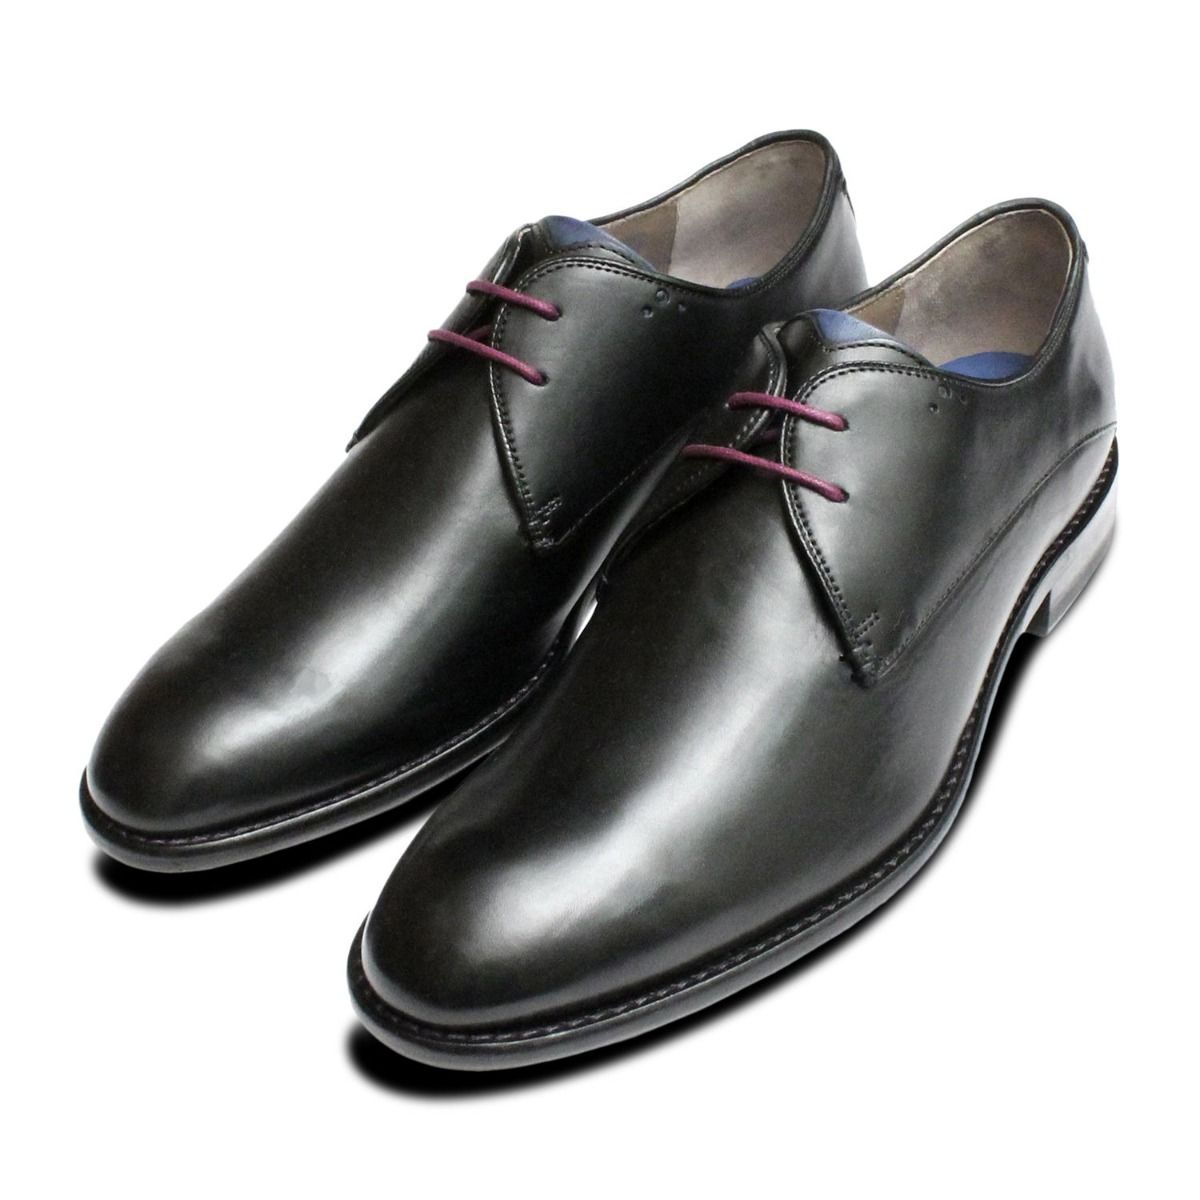 oliver sweeney knole derby shoes